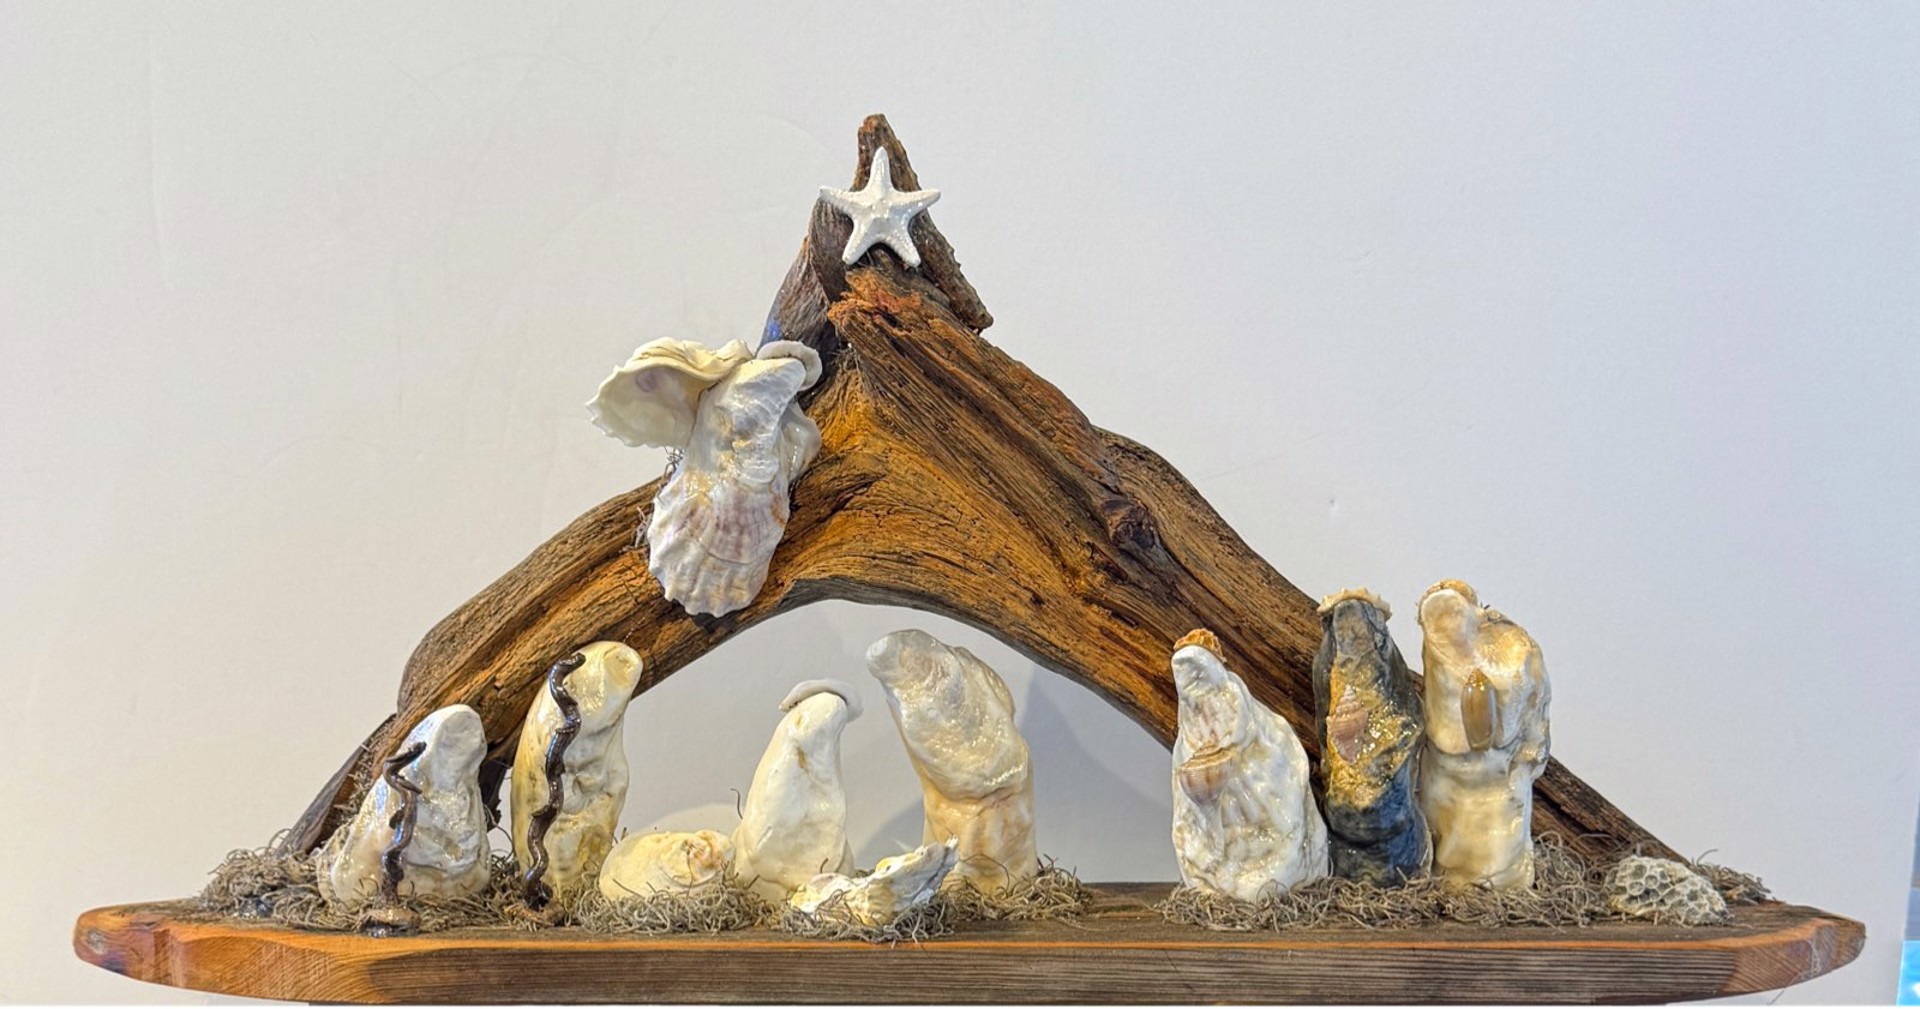 Large Driftwood on Wood,Crèche of the Sea CN23-55 by Chris Nietert